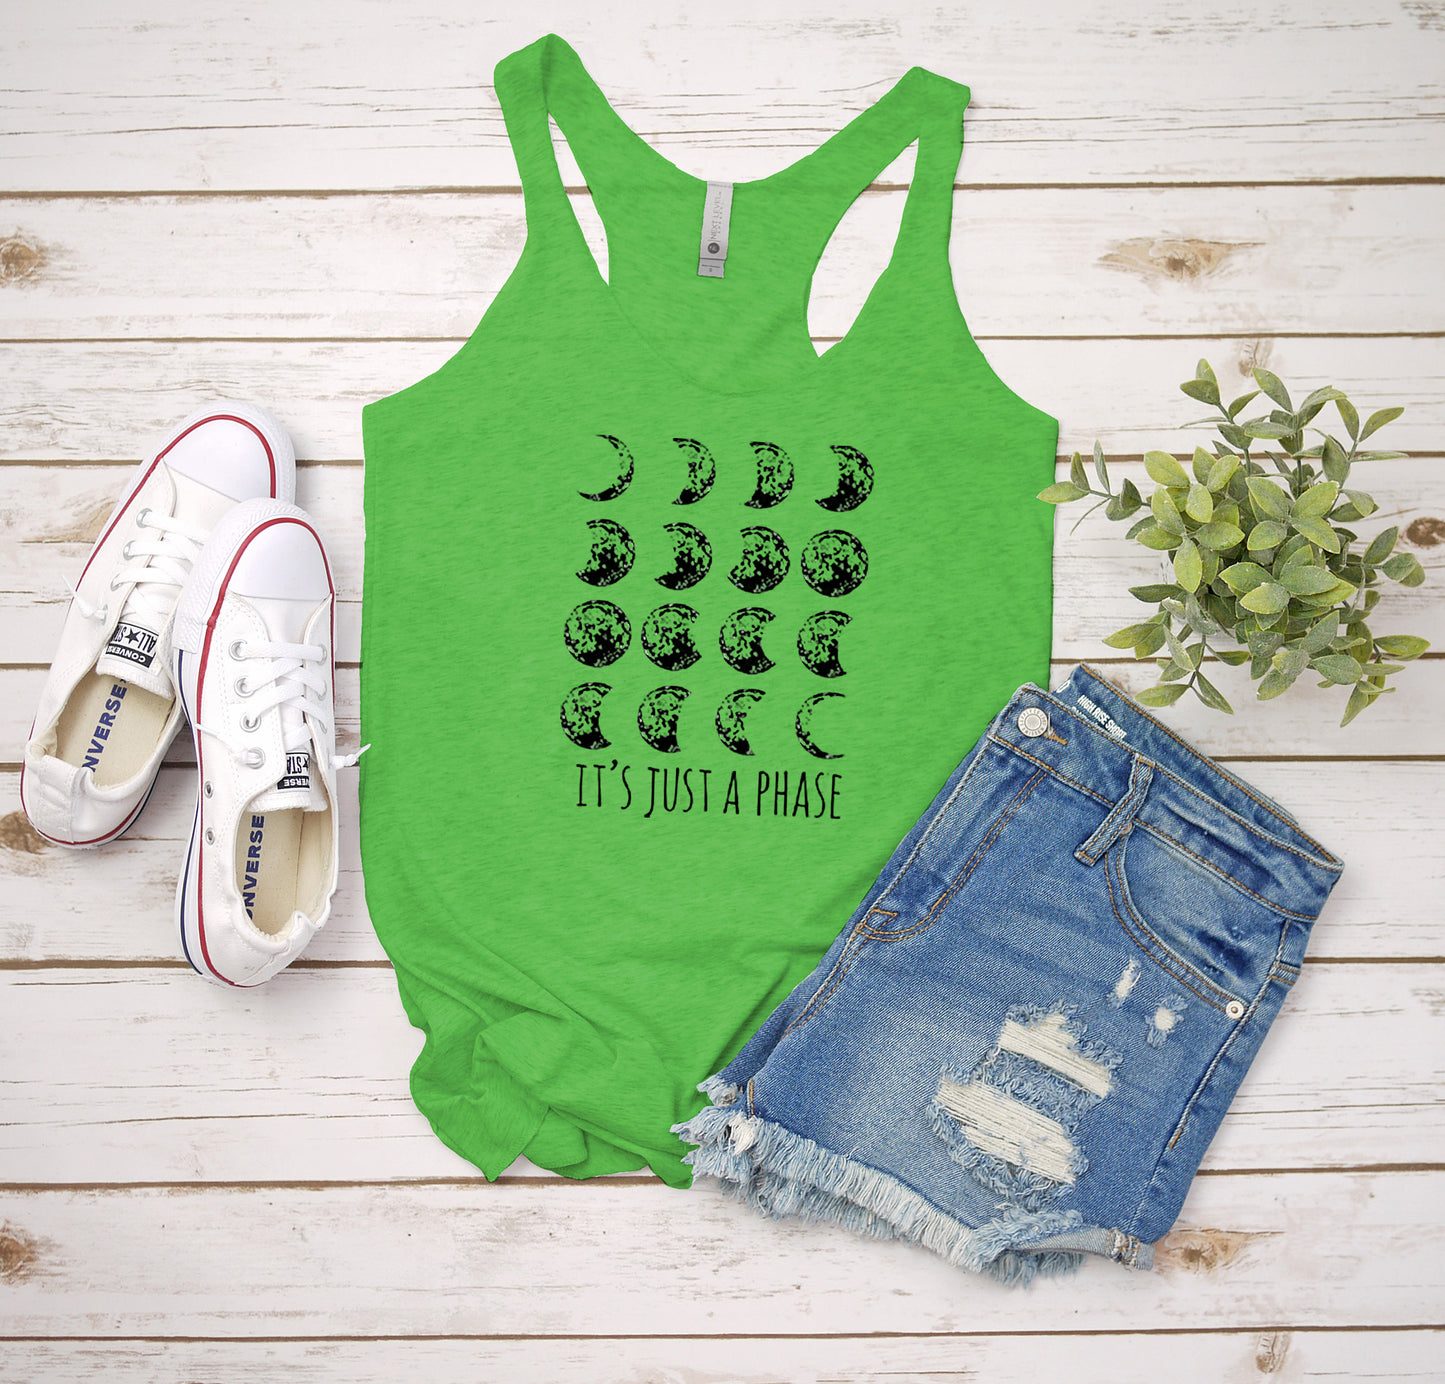 It's Just A Phase - Moon - Women's Tank - Heather Gray, Tahiti, or Envy